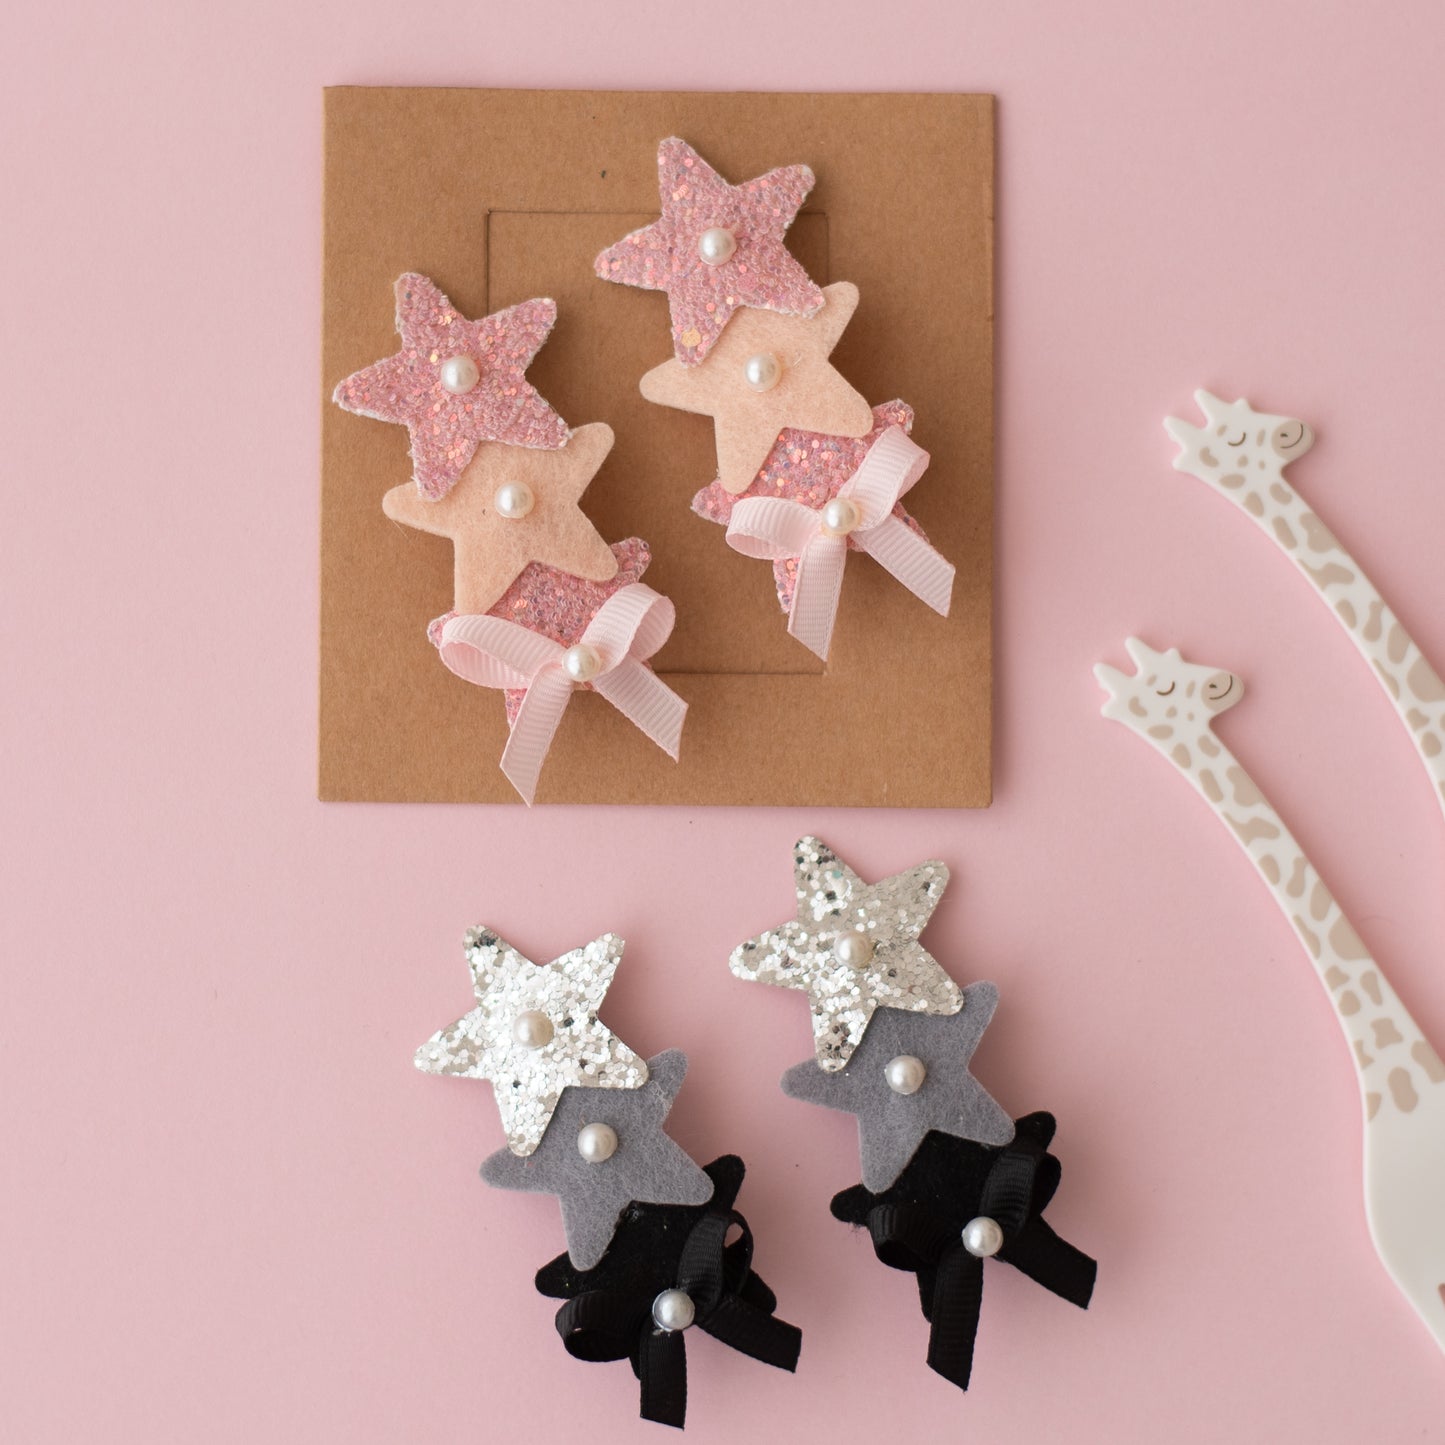 Cute glitter star alligator clips embellished with pearls and small bows  - Peach, Black, Silver